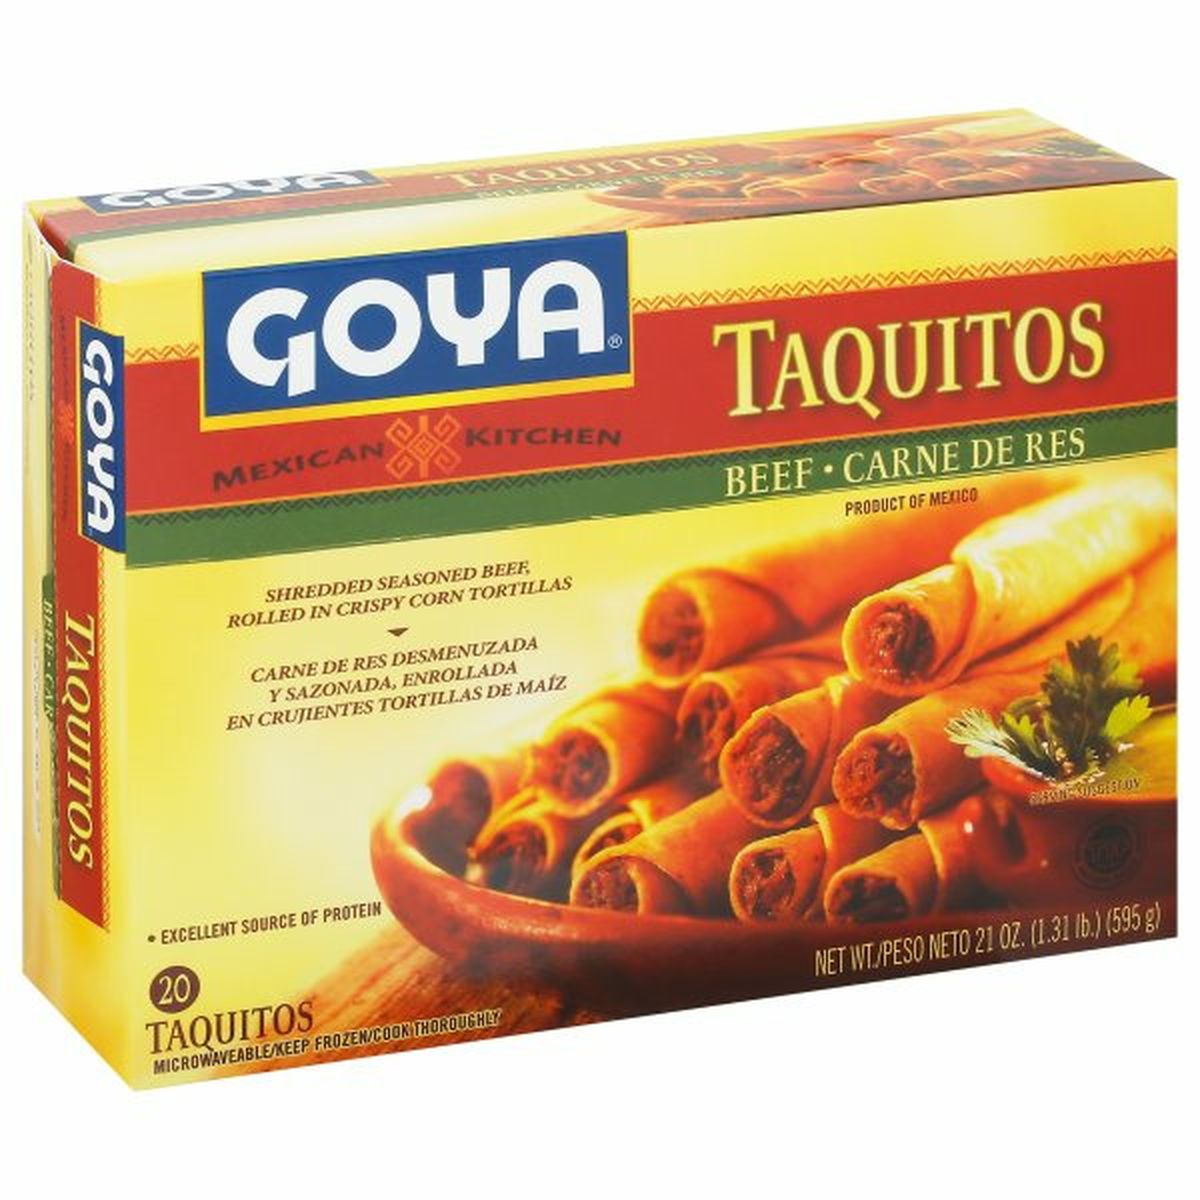 Calories in Goya Mexican Kitchen Taquitos, Beef